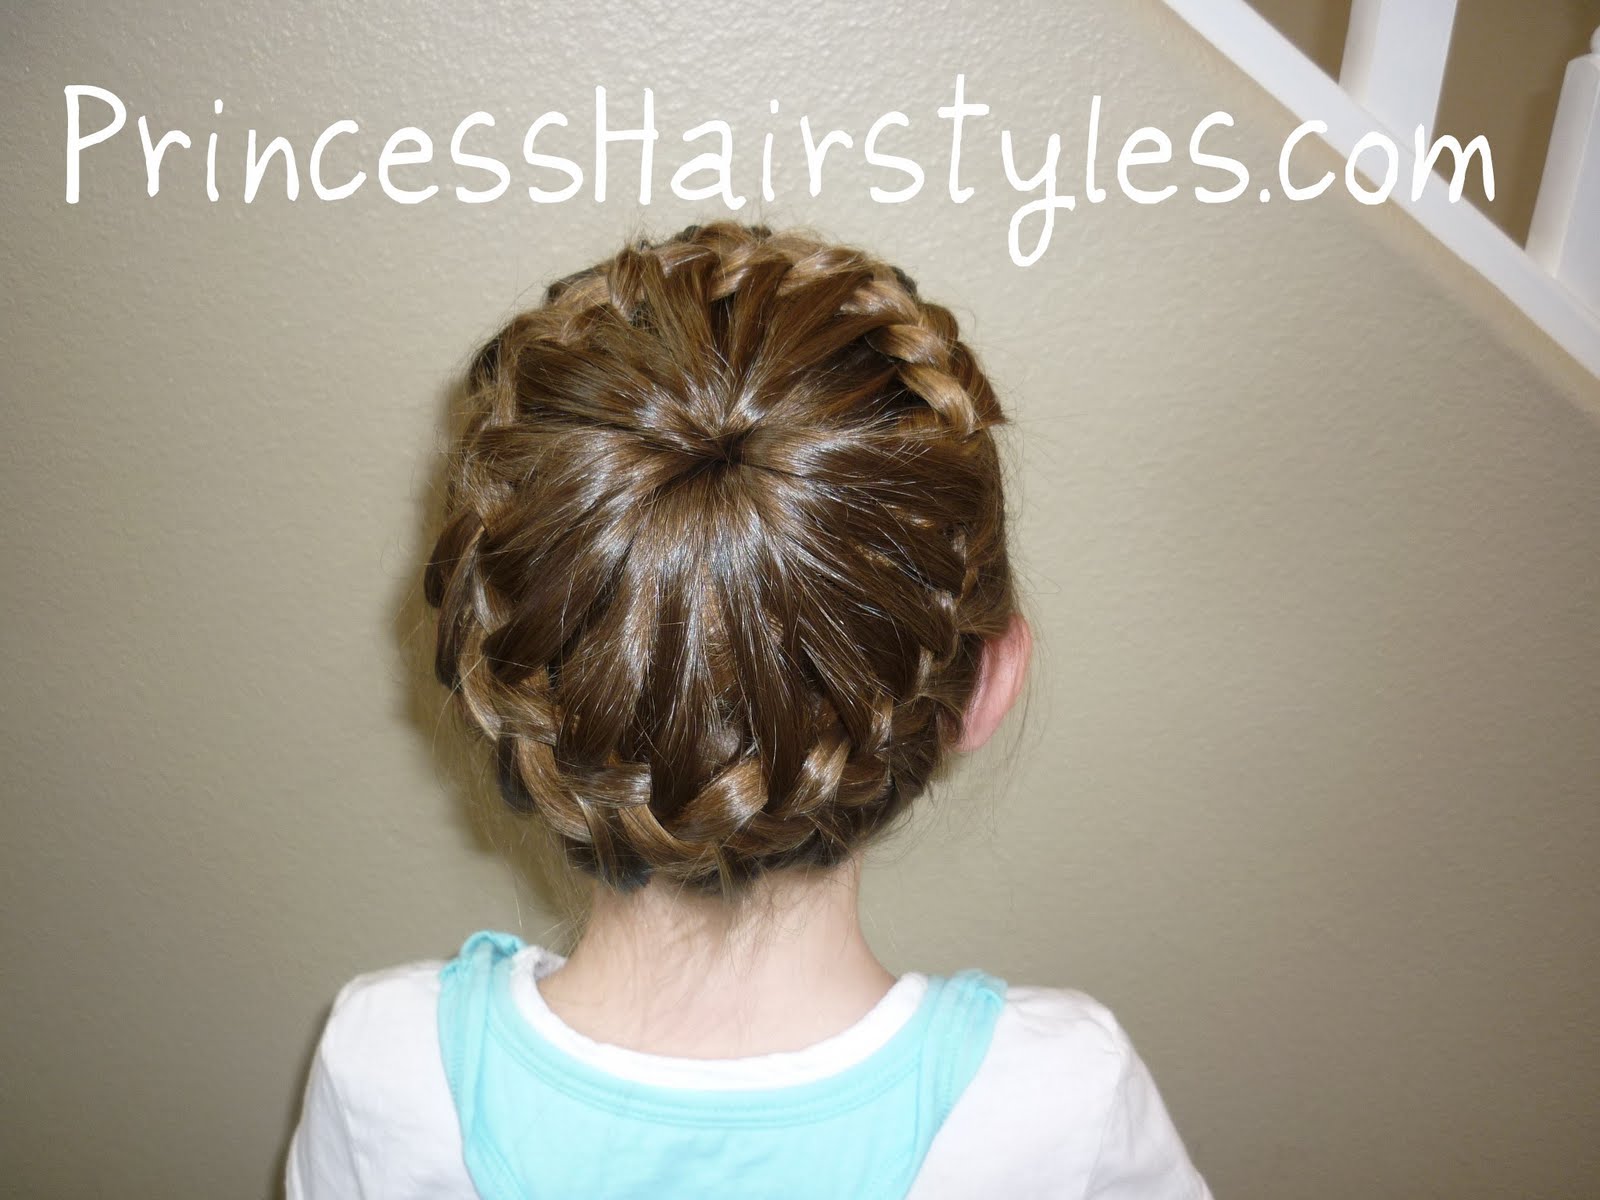 Hairstyles For Girls: Never Ending French Braid Bun